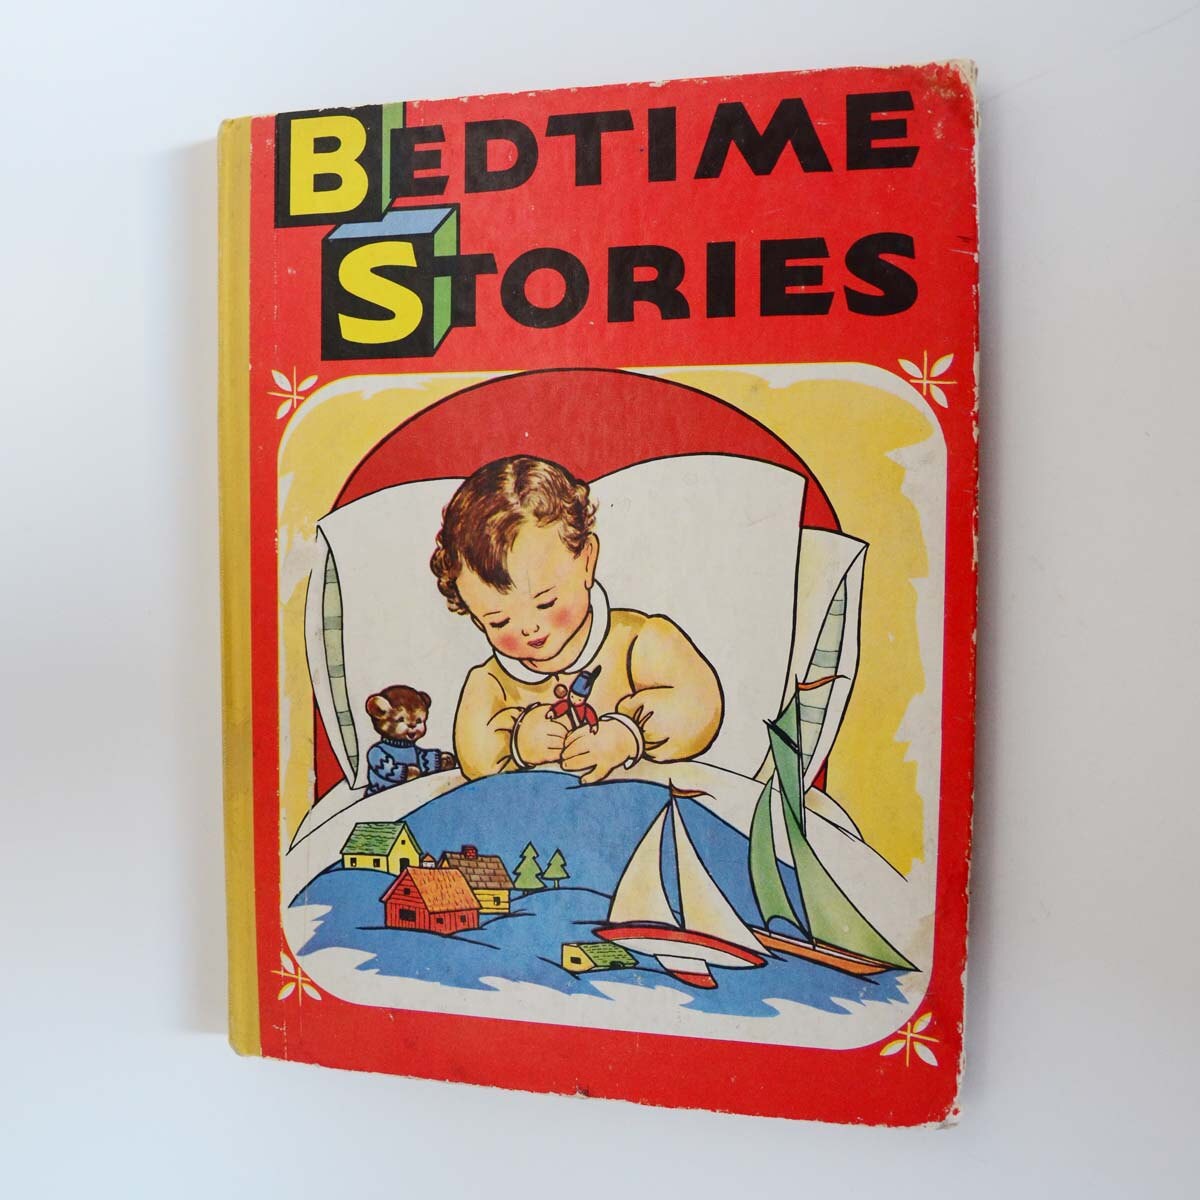 Bedtime Stories Vintage Book Illustrated Published by The | Etsy